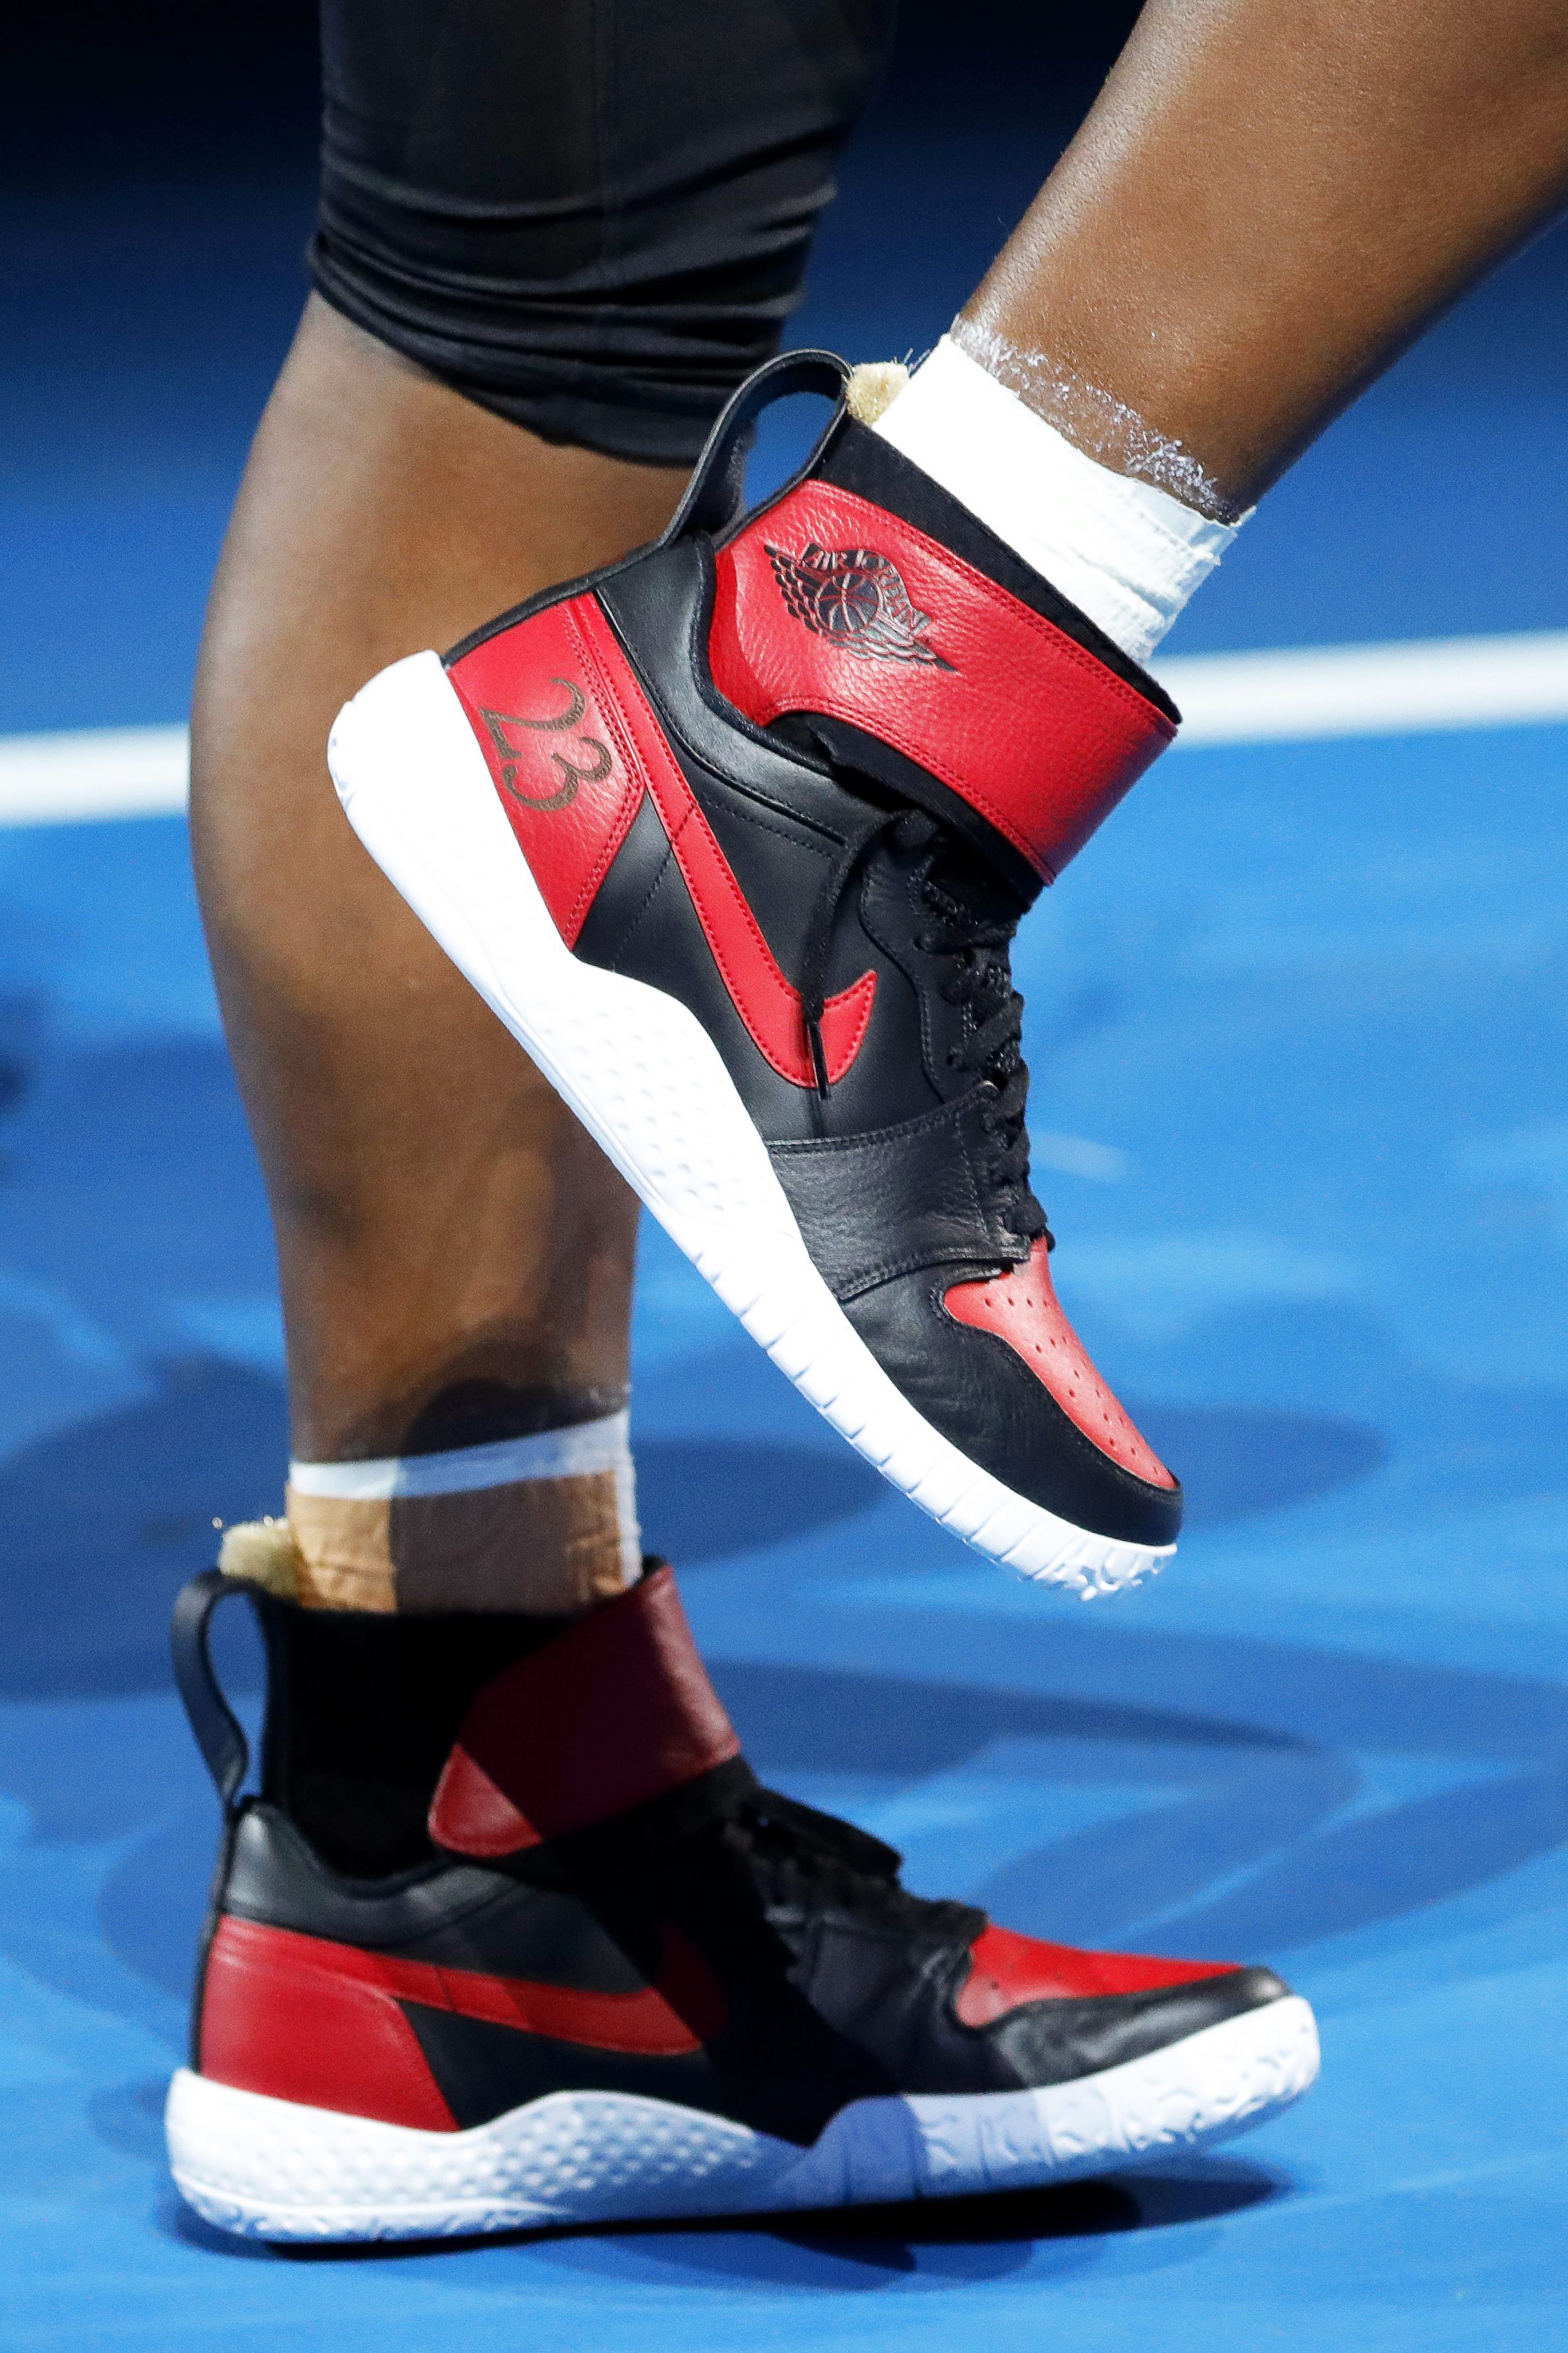 Serena Williams got the perfect pair of Jordans for